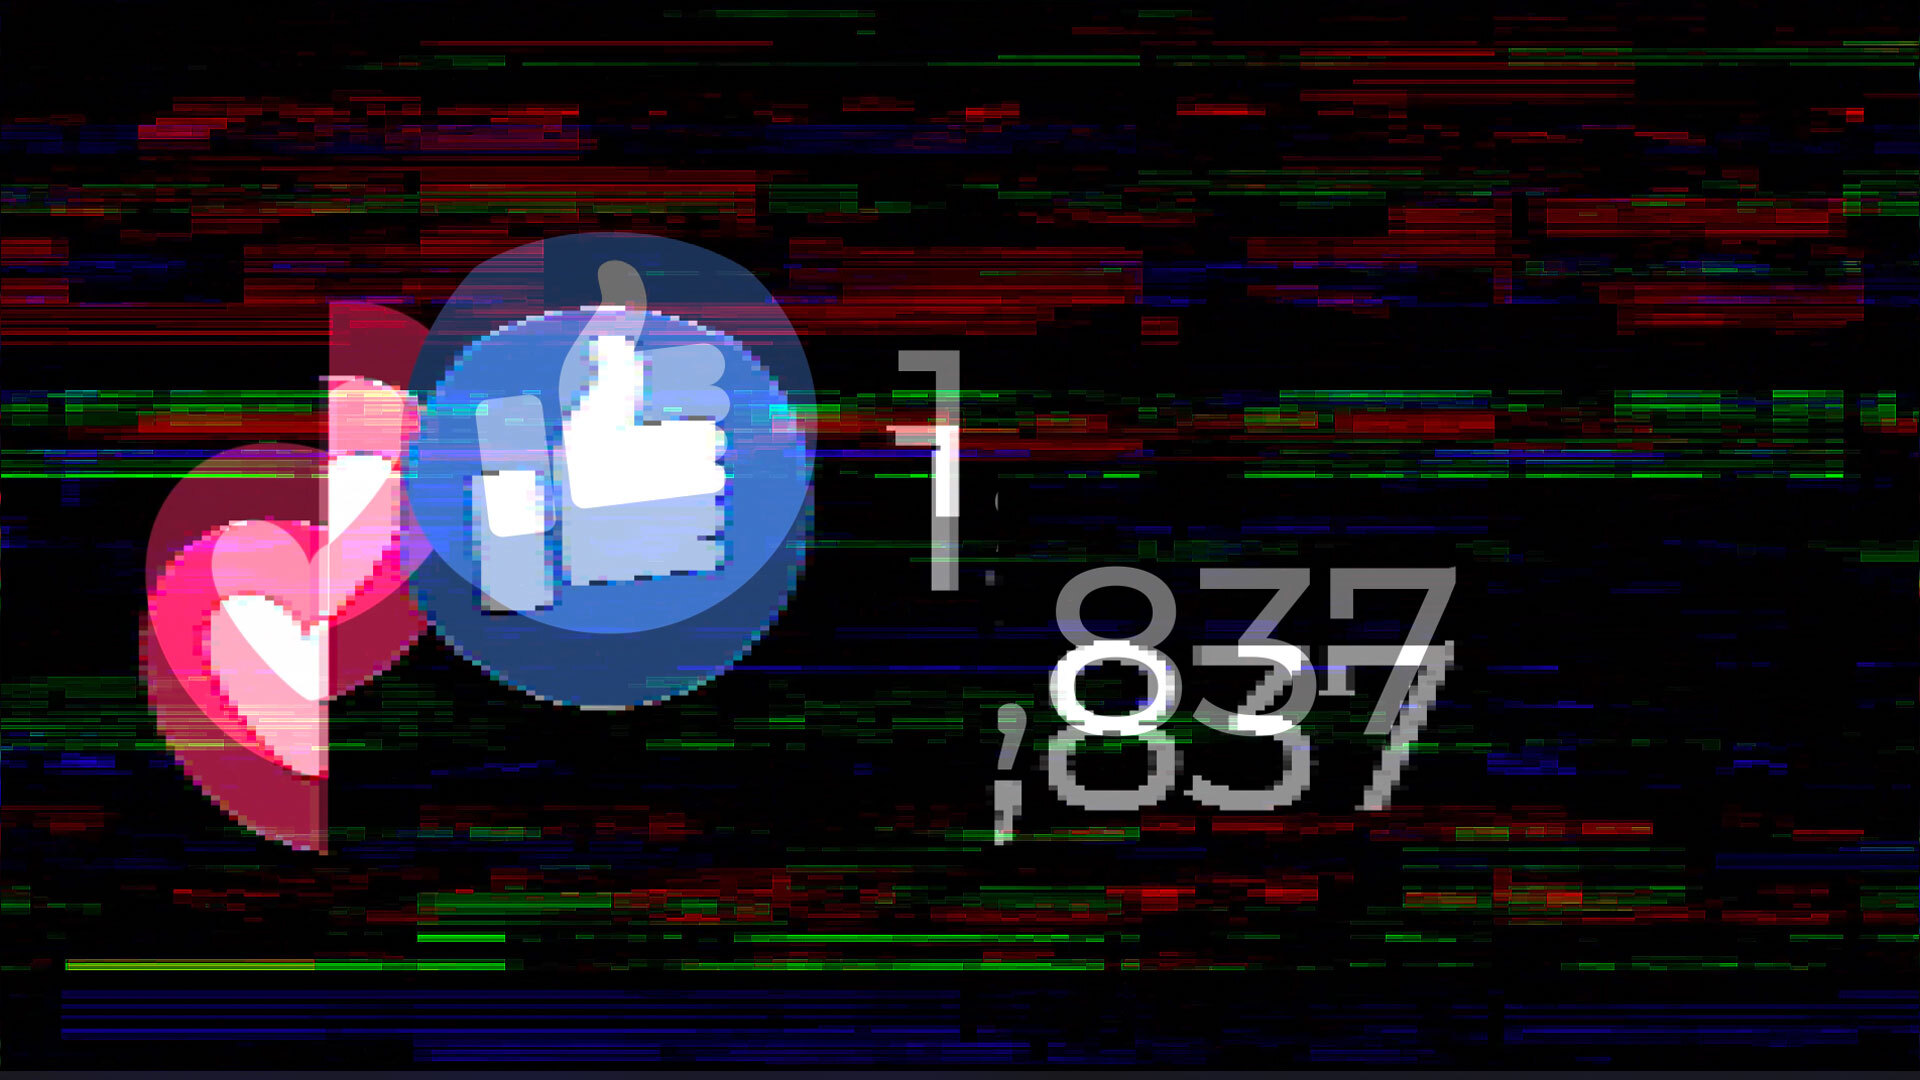 Conceptual illustration showing facebook likes with a glitch effect